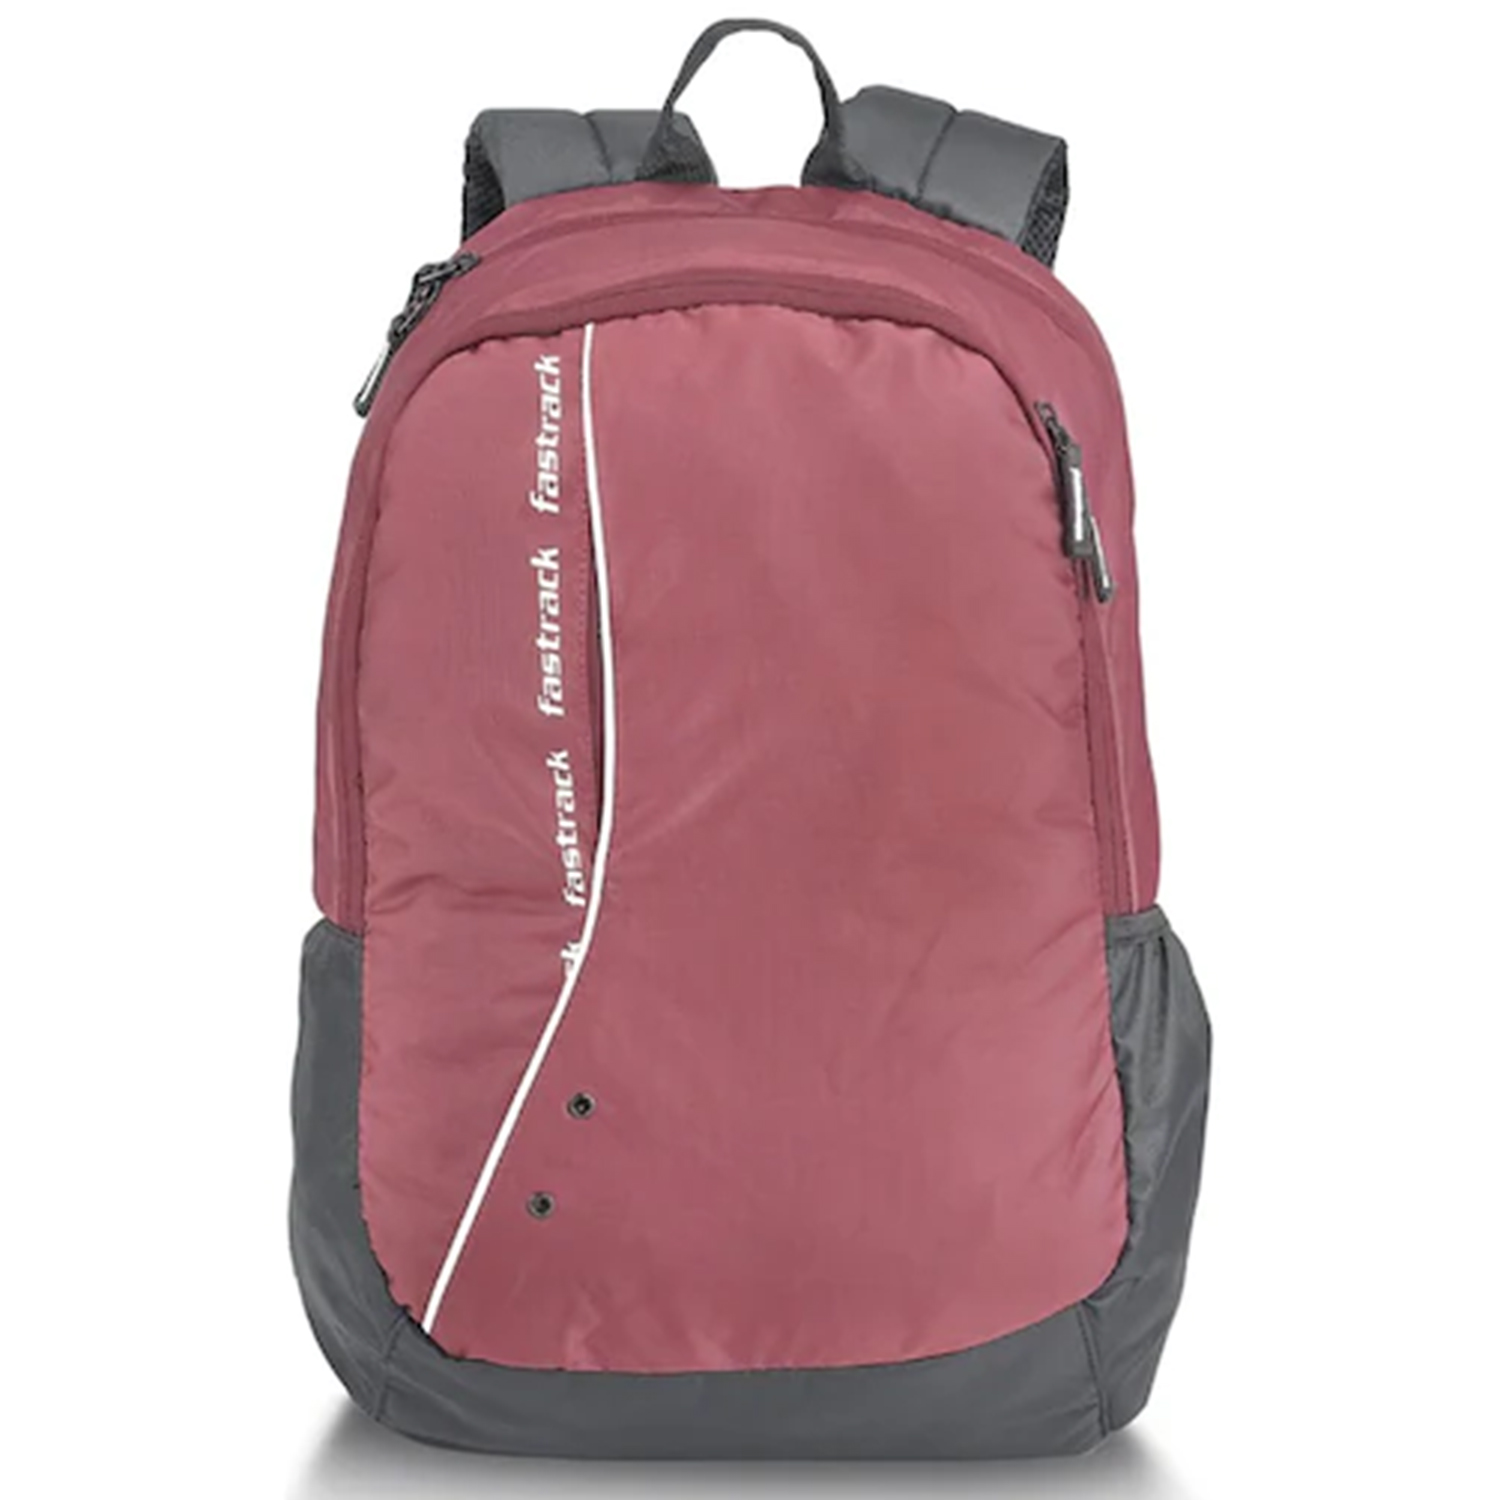 Top more than 85 fastrack bag review - in.duhocakina